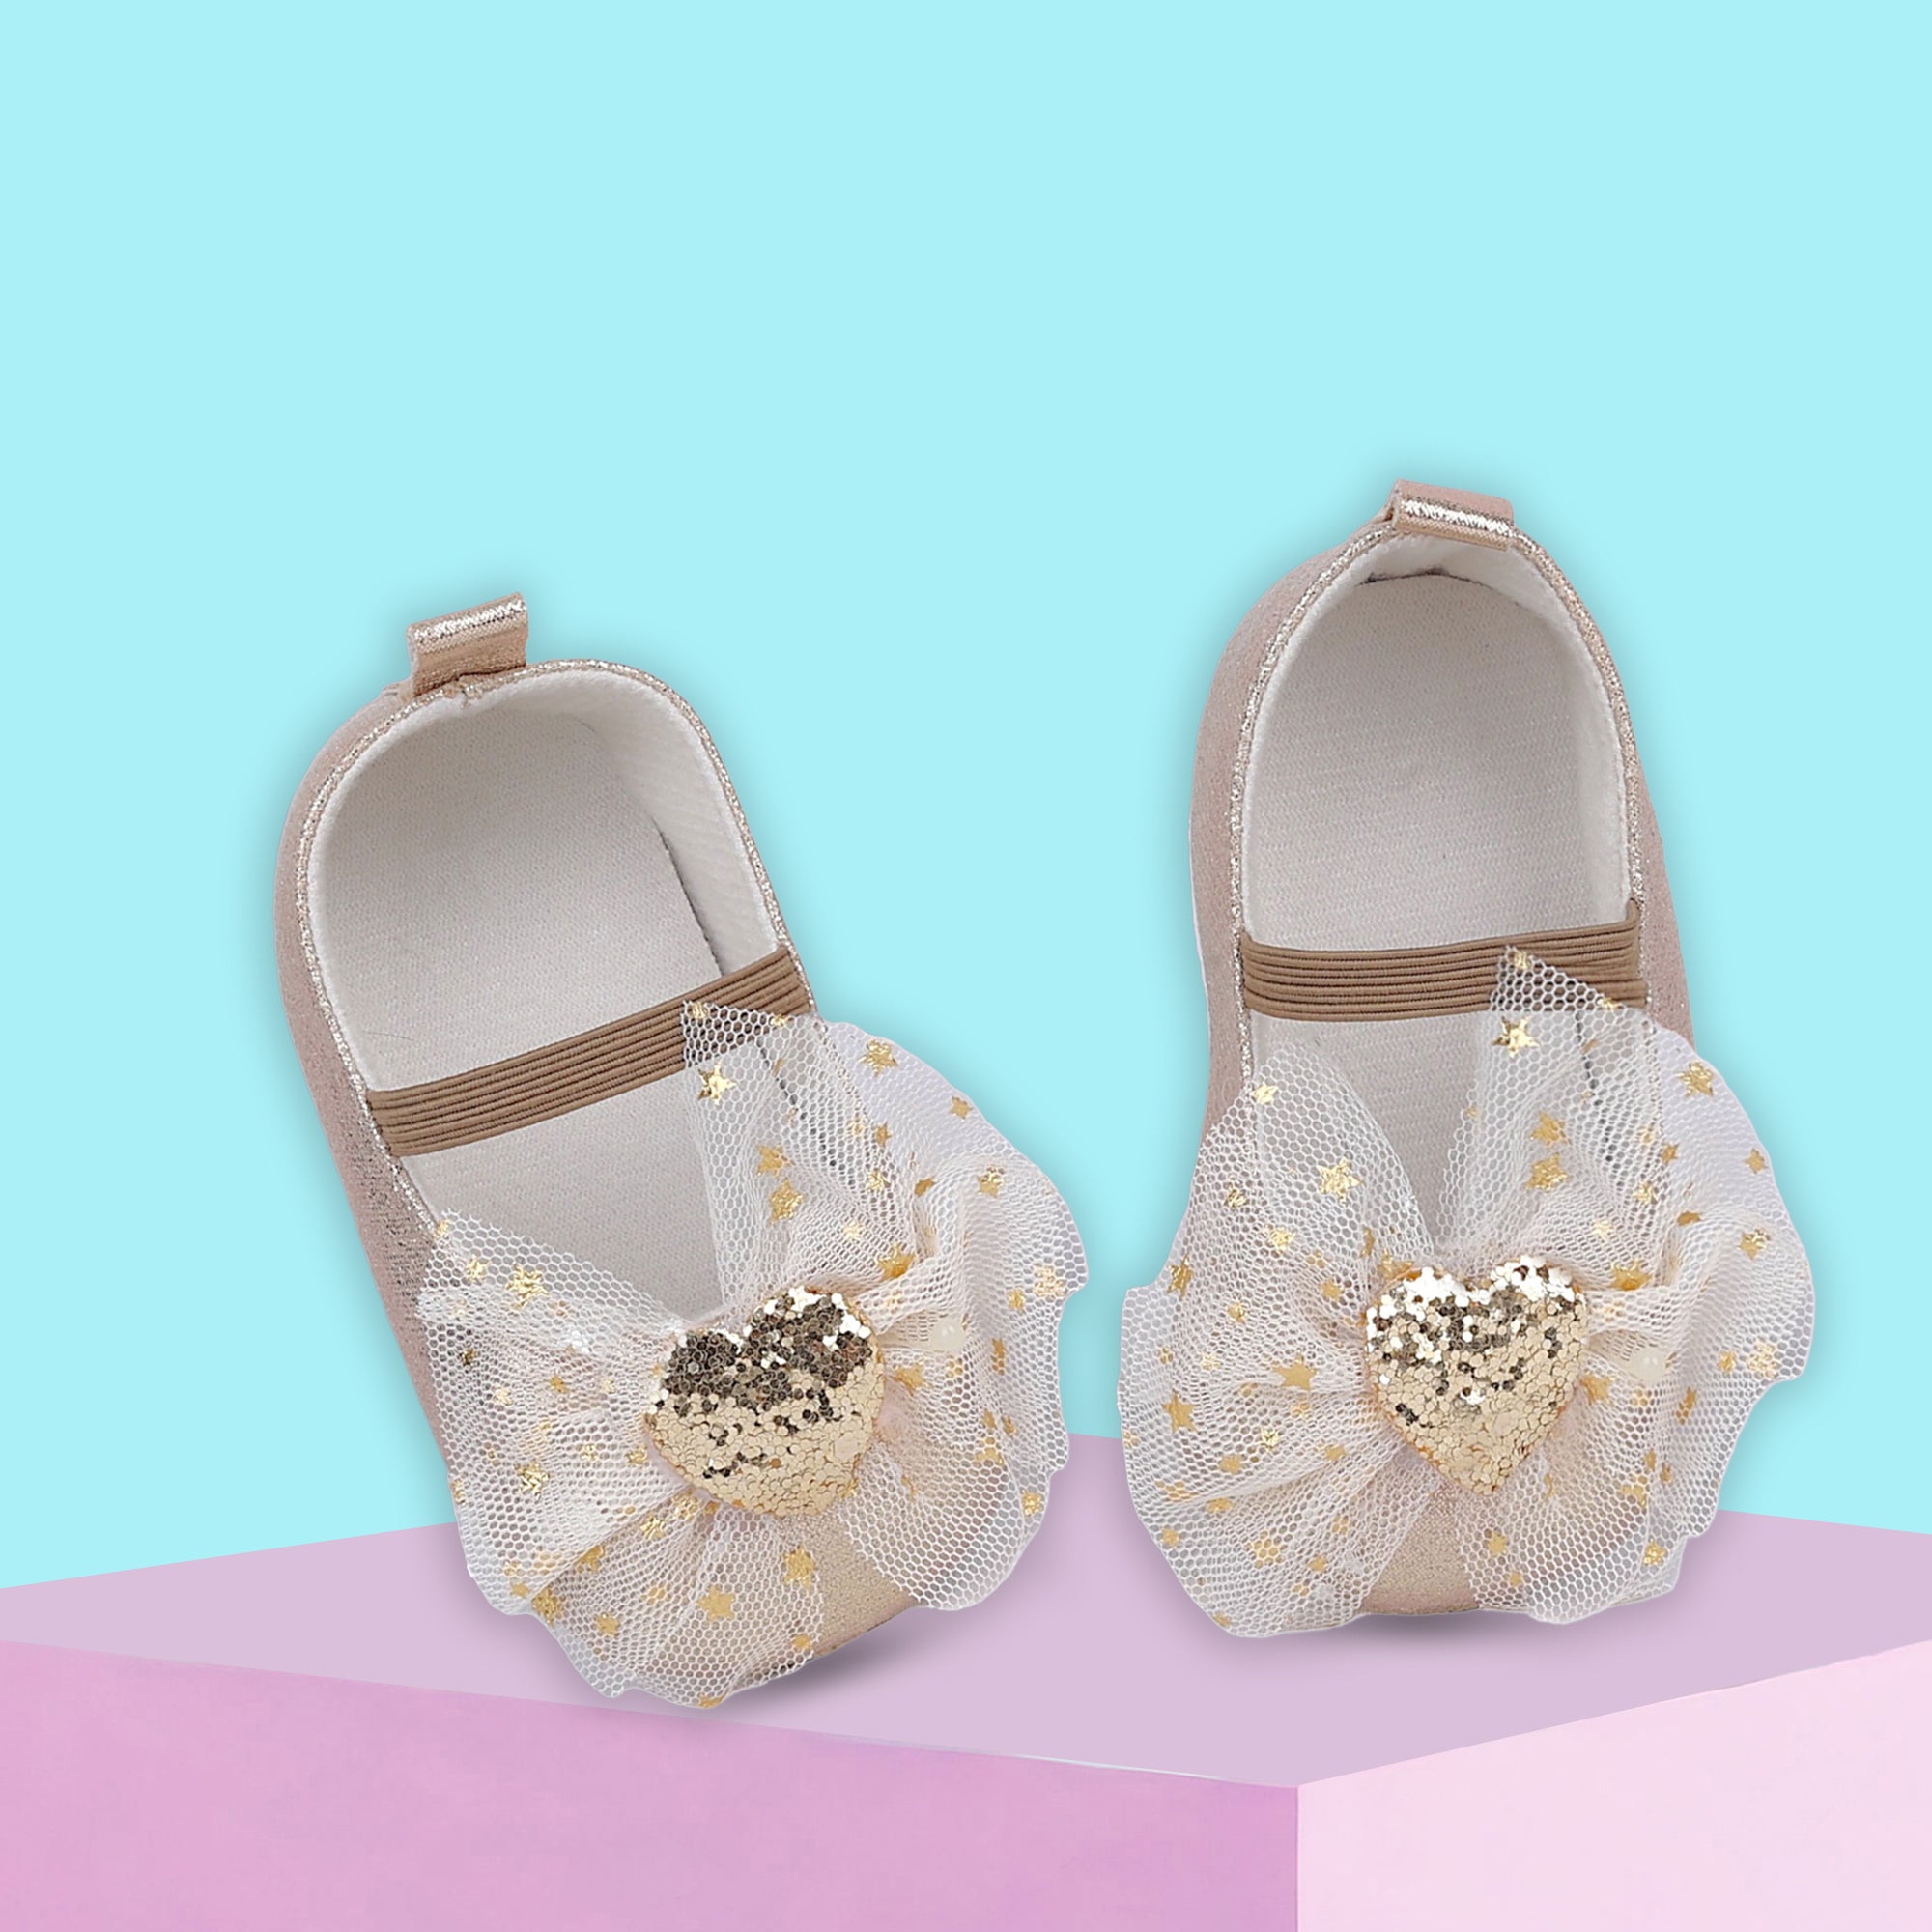 Baby Moo Embellished Bow Glittery Heart Anti-Skid Ballerina Booties - Gold